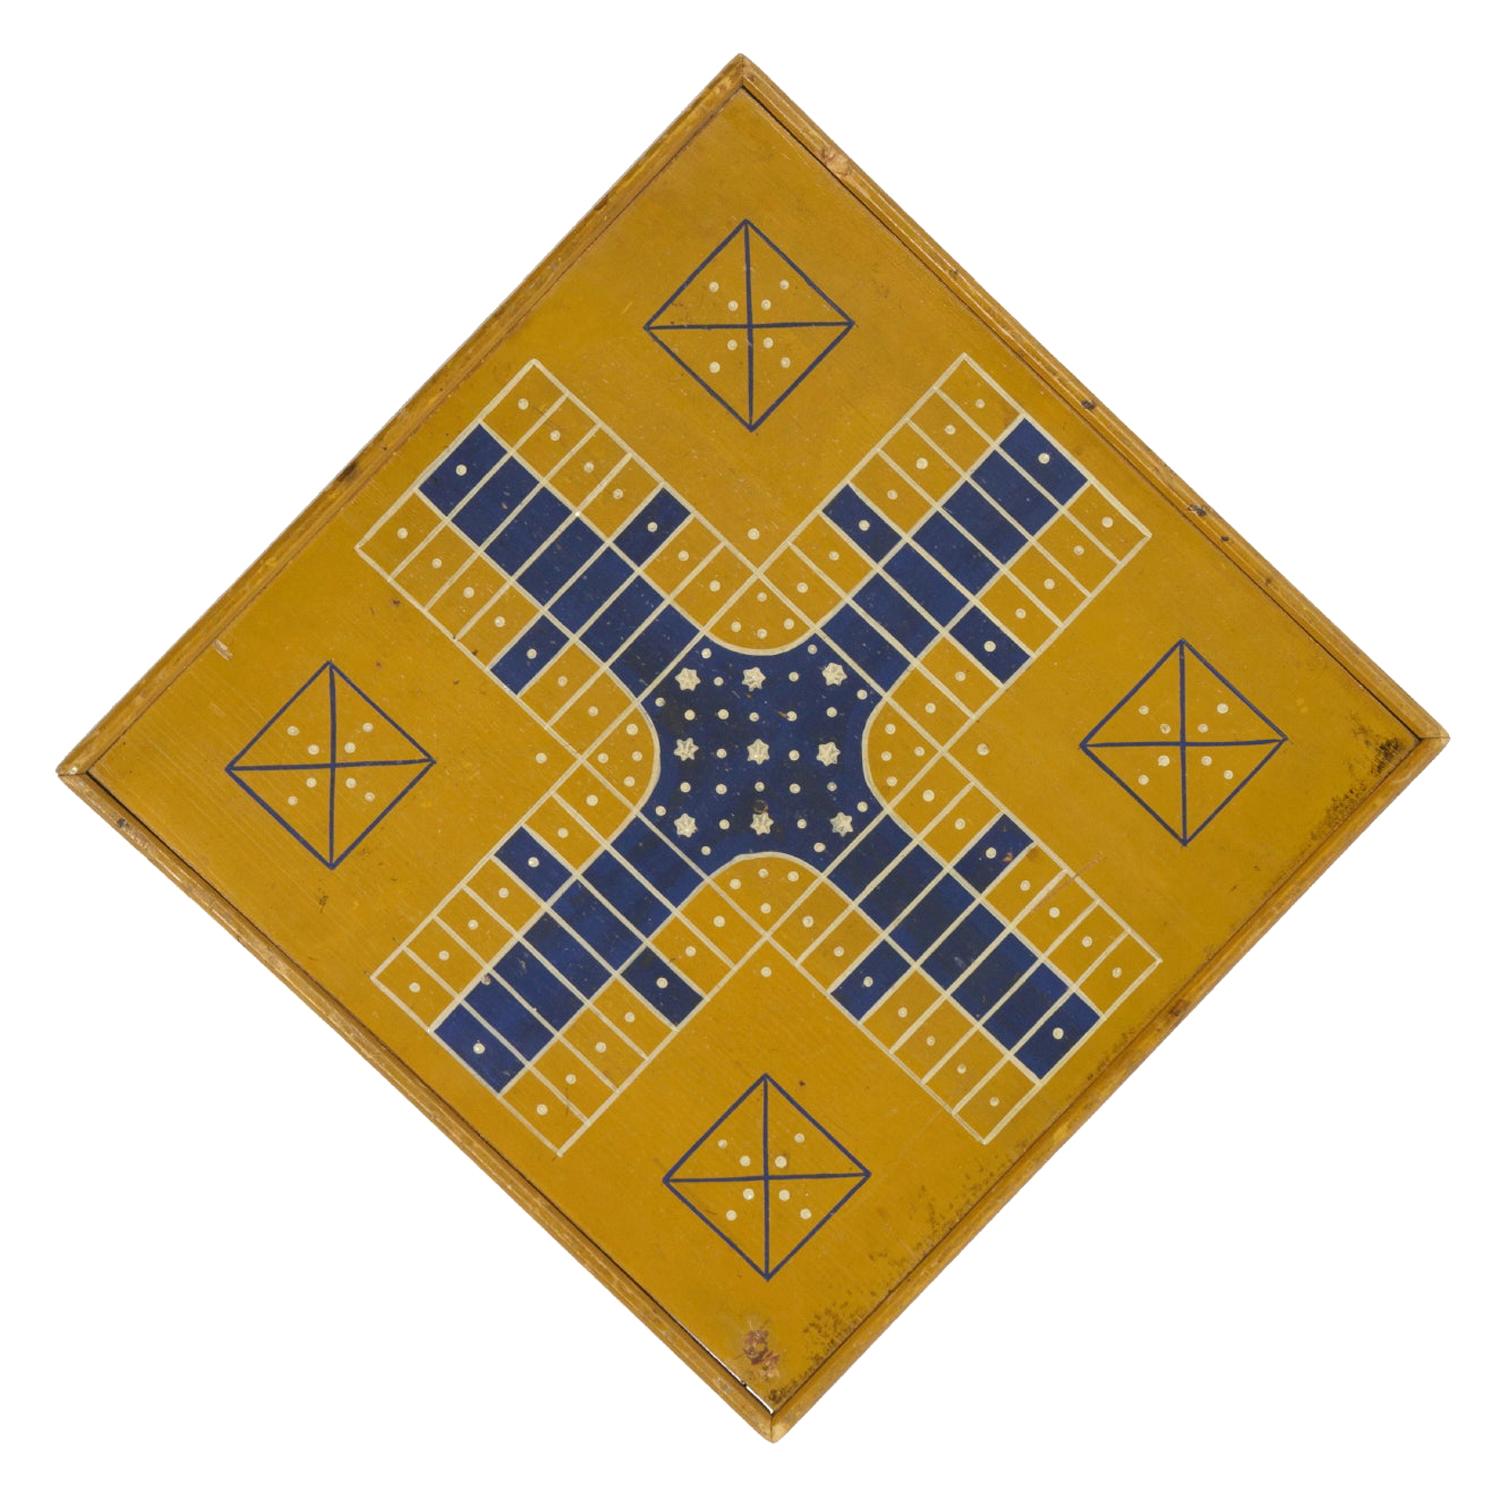 Yellow and Blue "Snowflake" Parcheesi Gameboard, Circa 1875